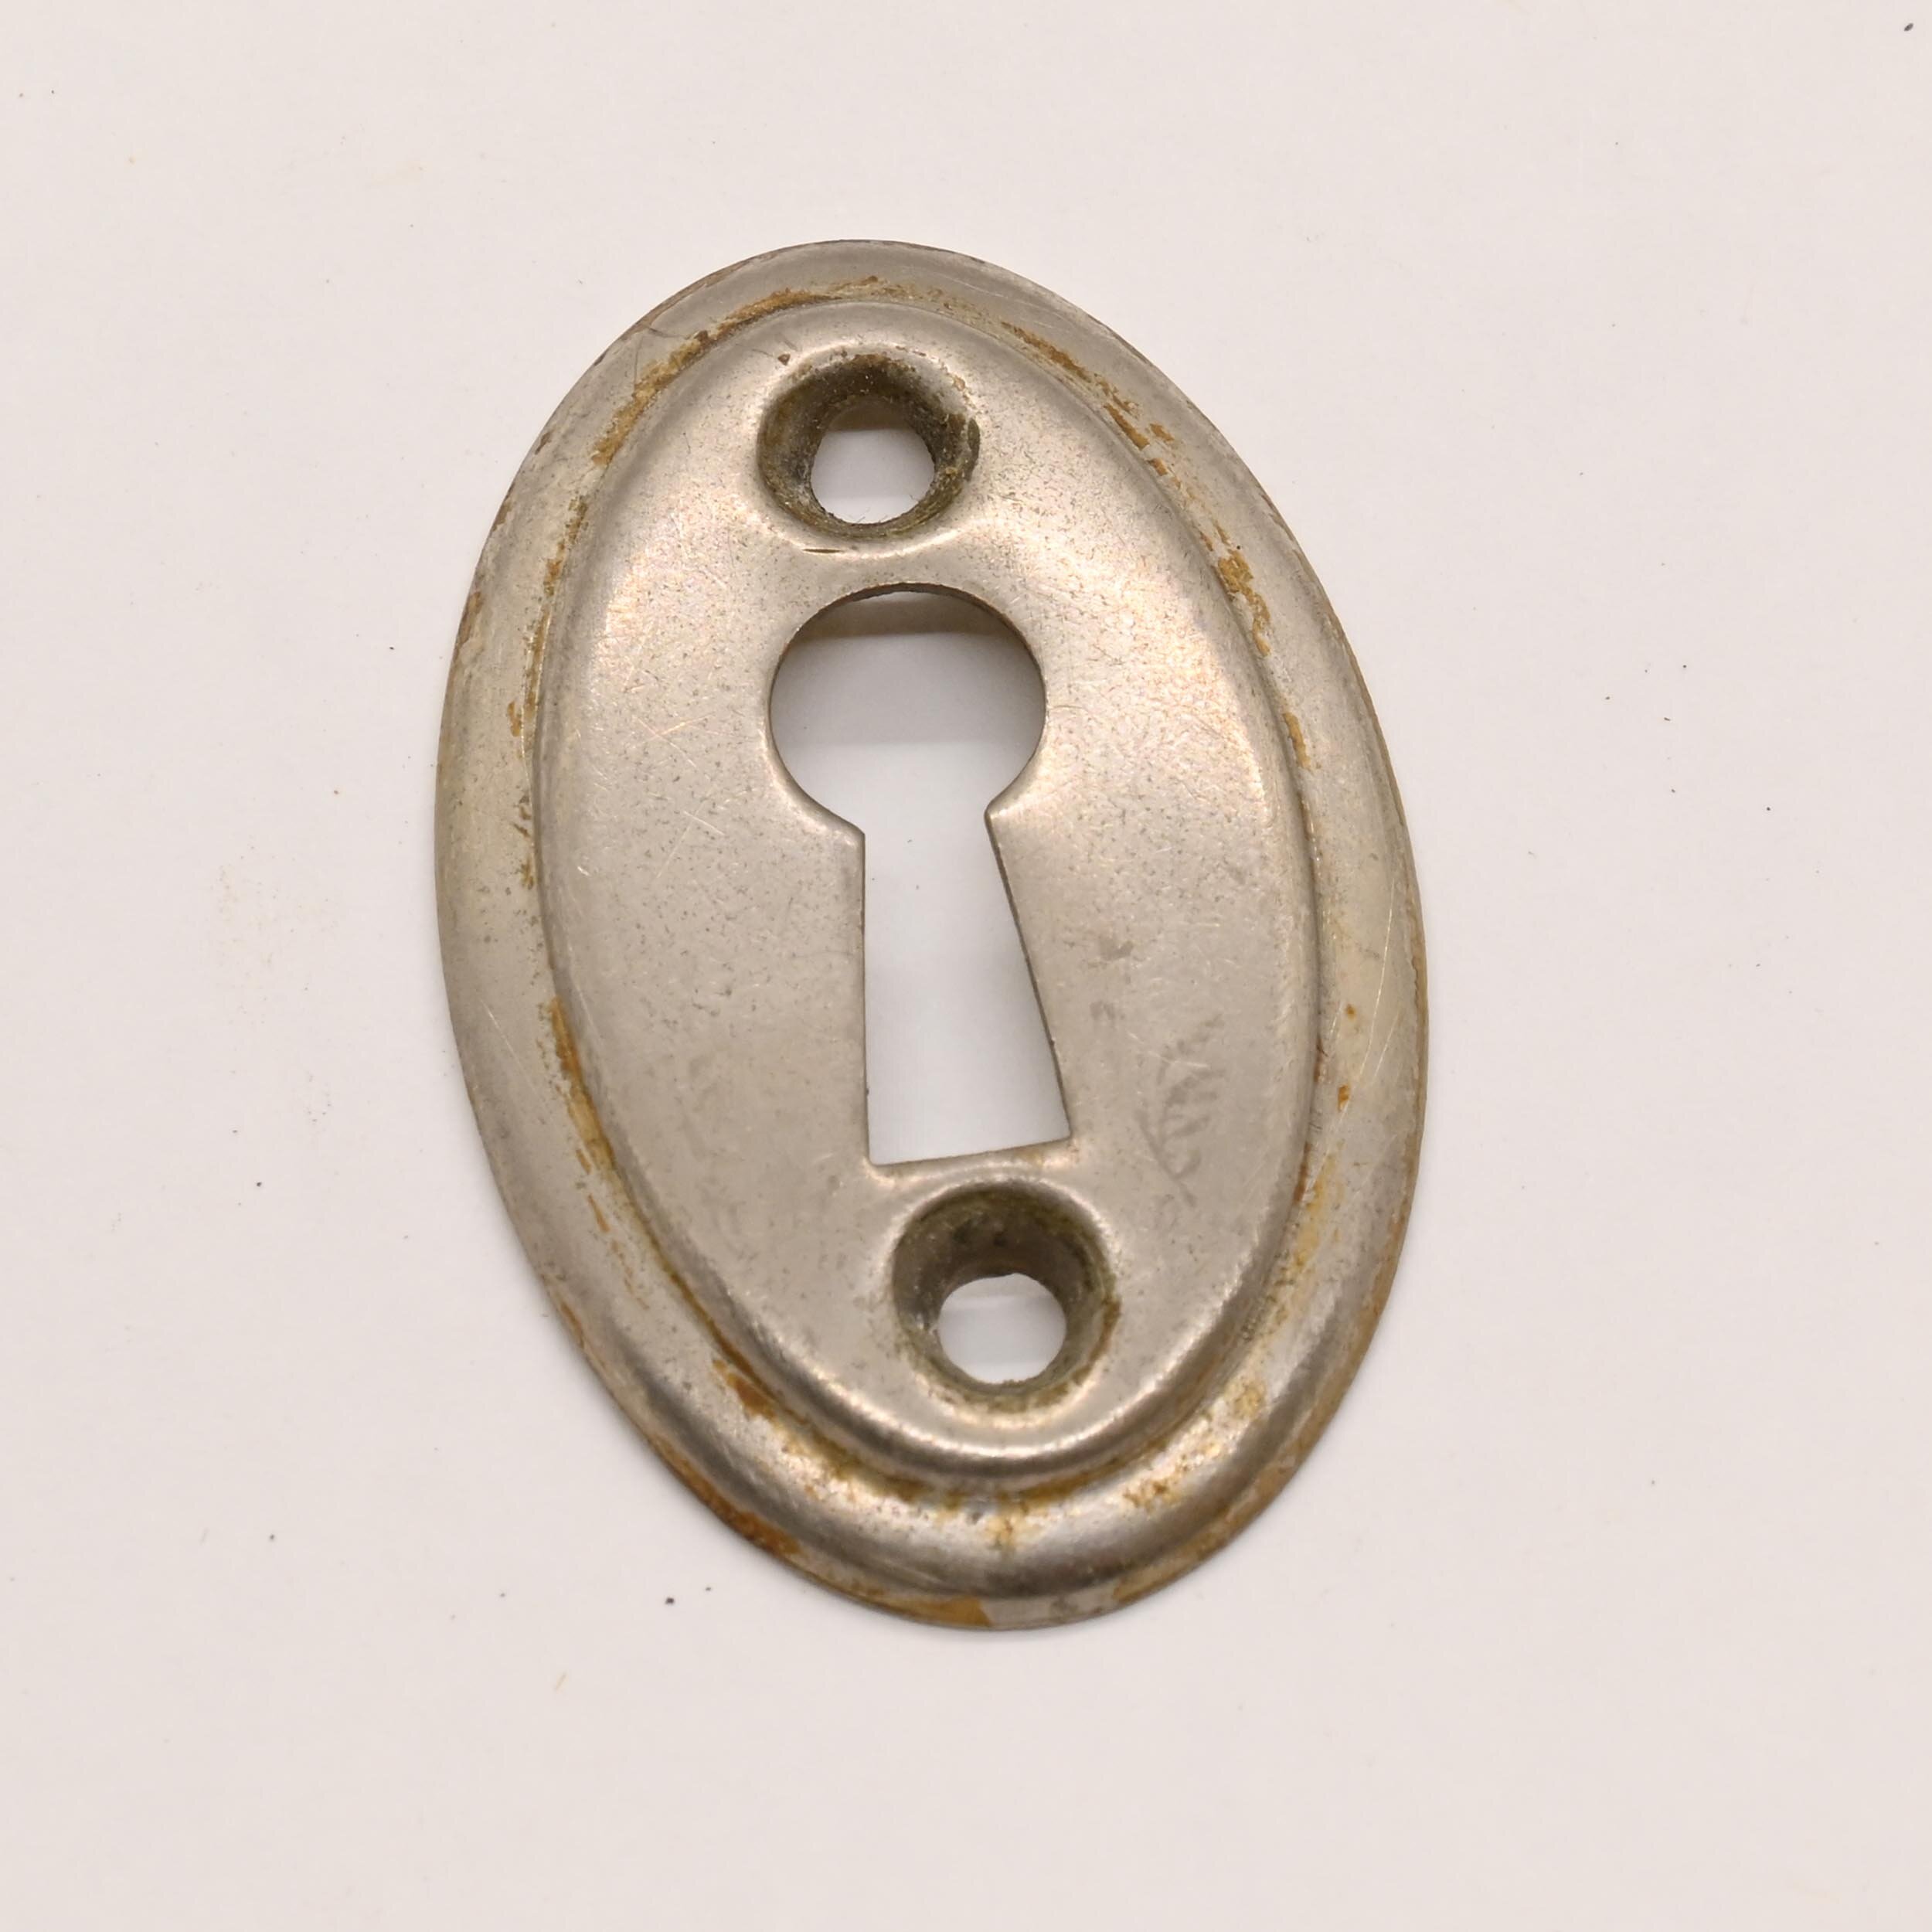 Very Nice Pair Antique Brass Oval Mortise Door Lock Key Hole Escutcheons Covers 